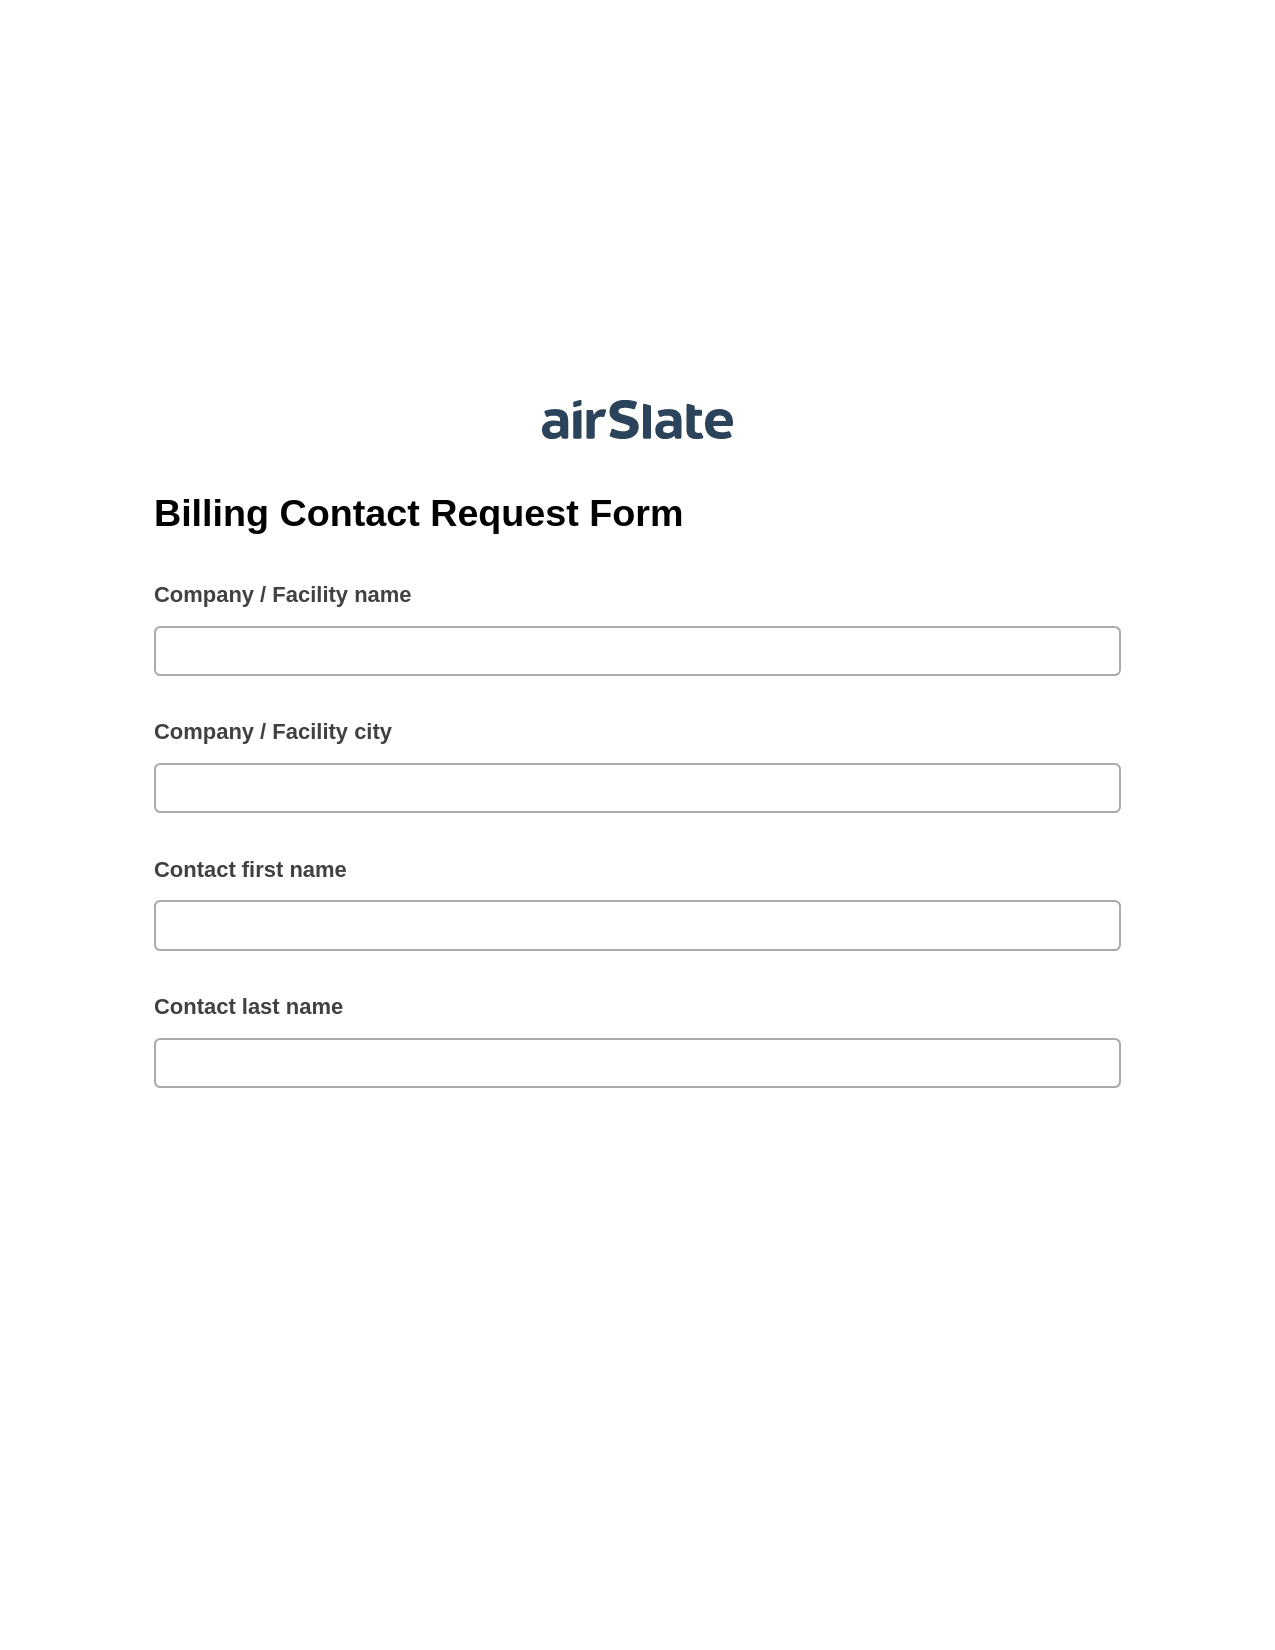 Multirole Billing Contact Request Form Pre-fill from Excel Spreadsheet Bot, Update MS Dynamics 365 Records Bot, Export to Excel 365 Bot